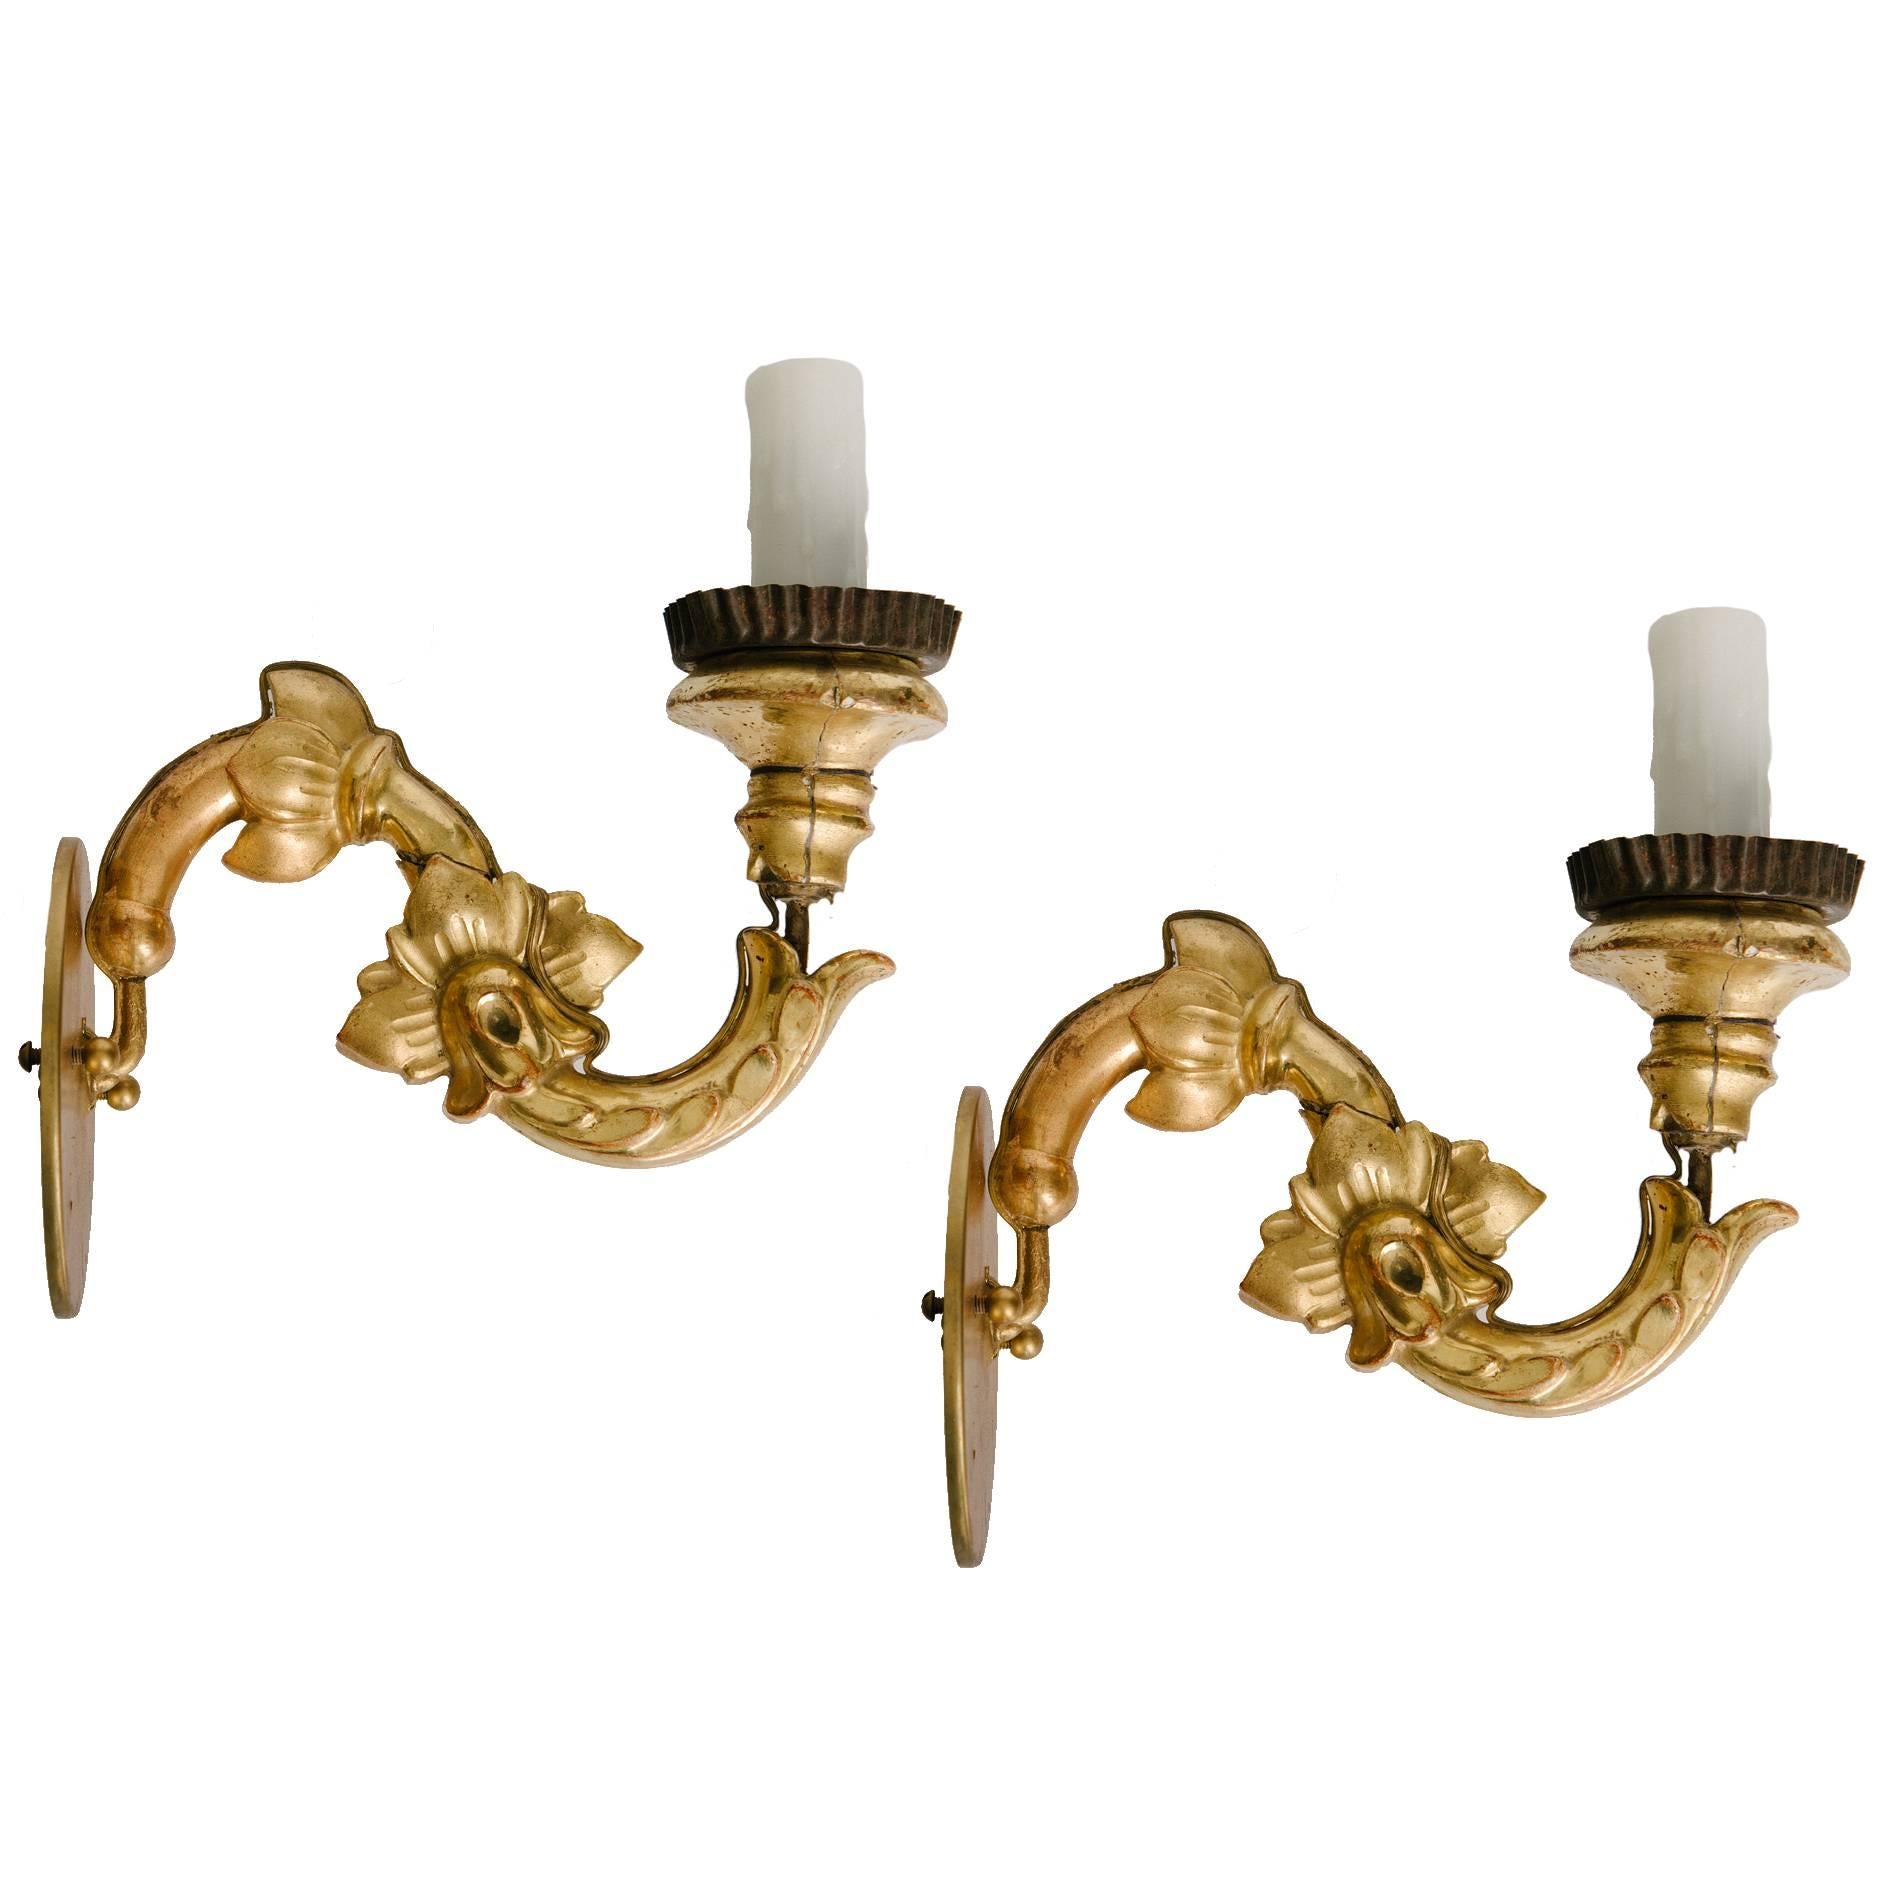 Pair of Gilded Sconces from Arezzo, Italy